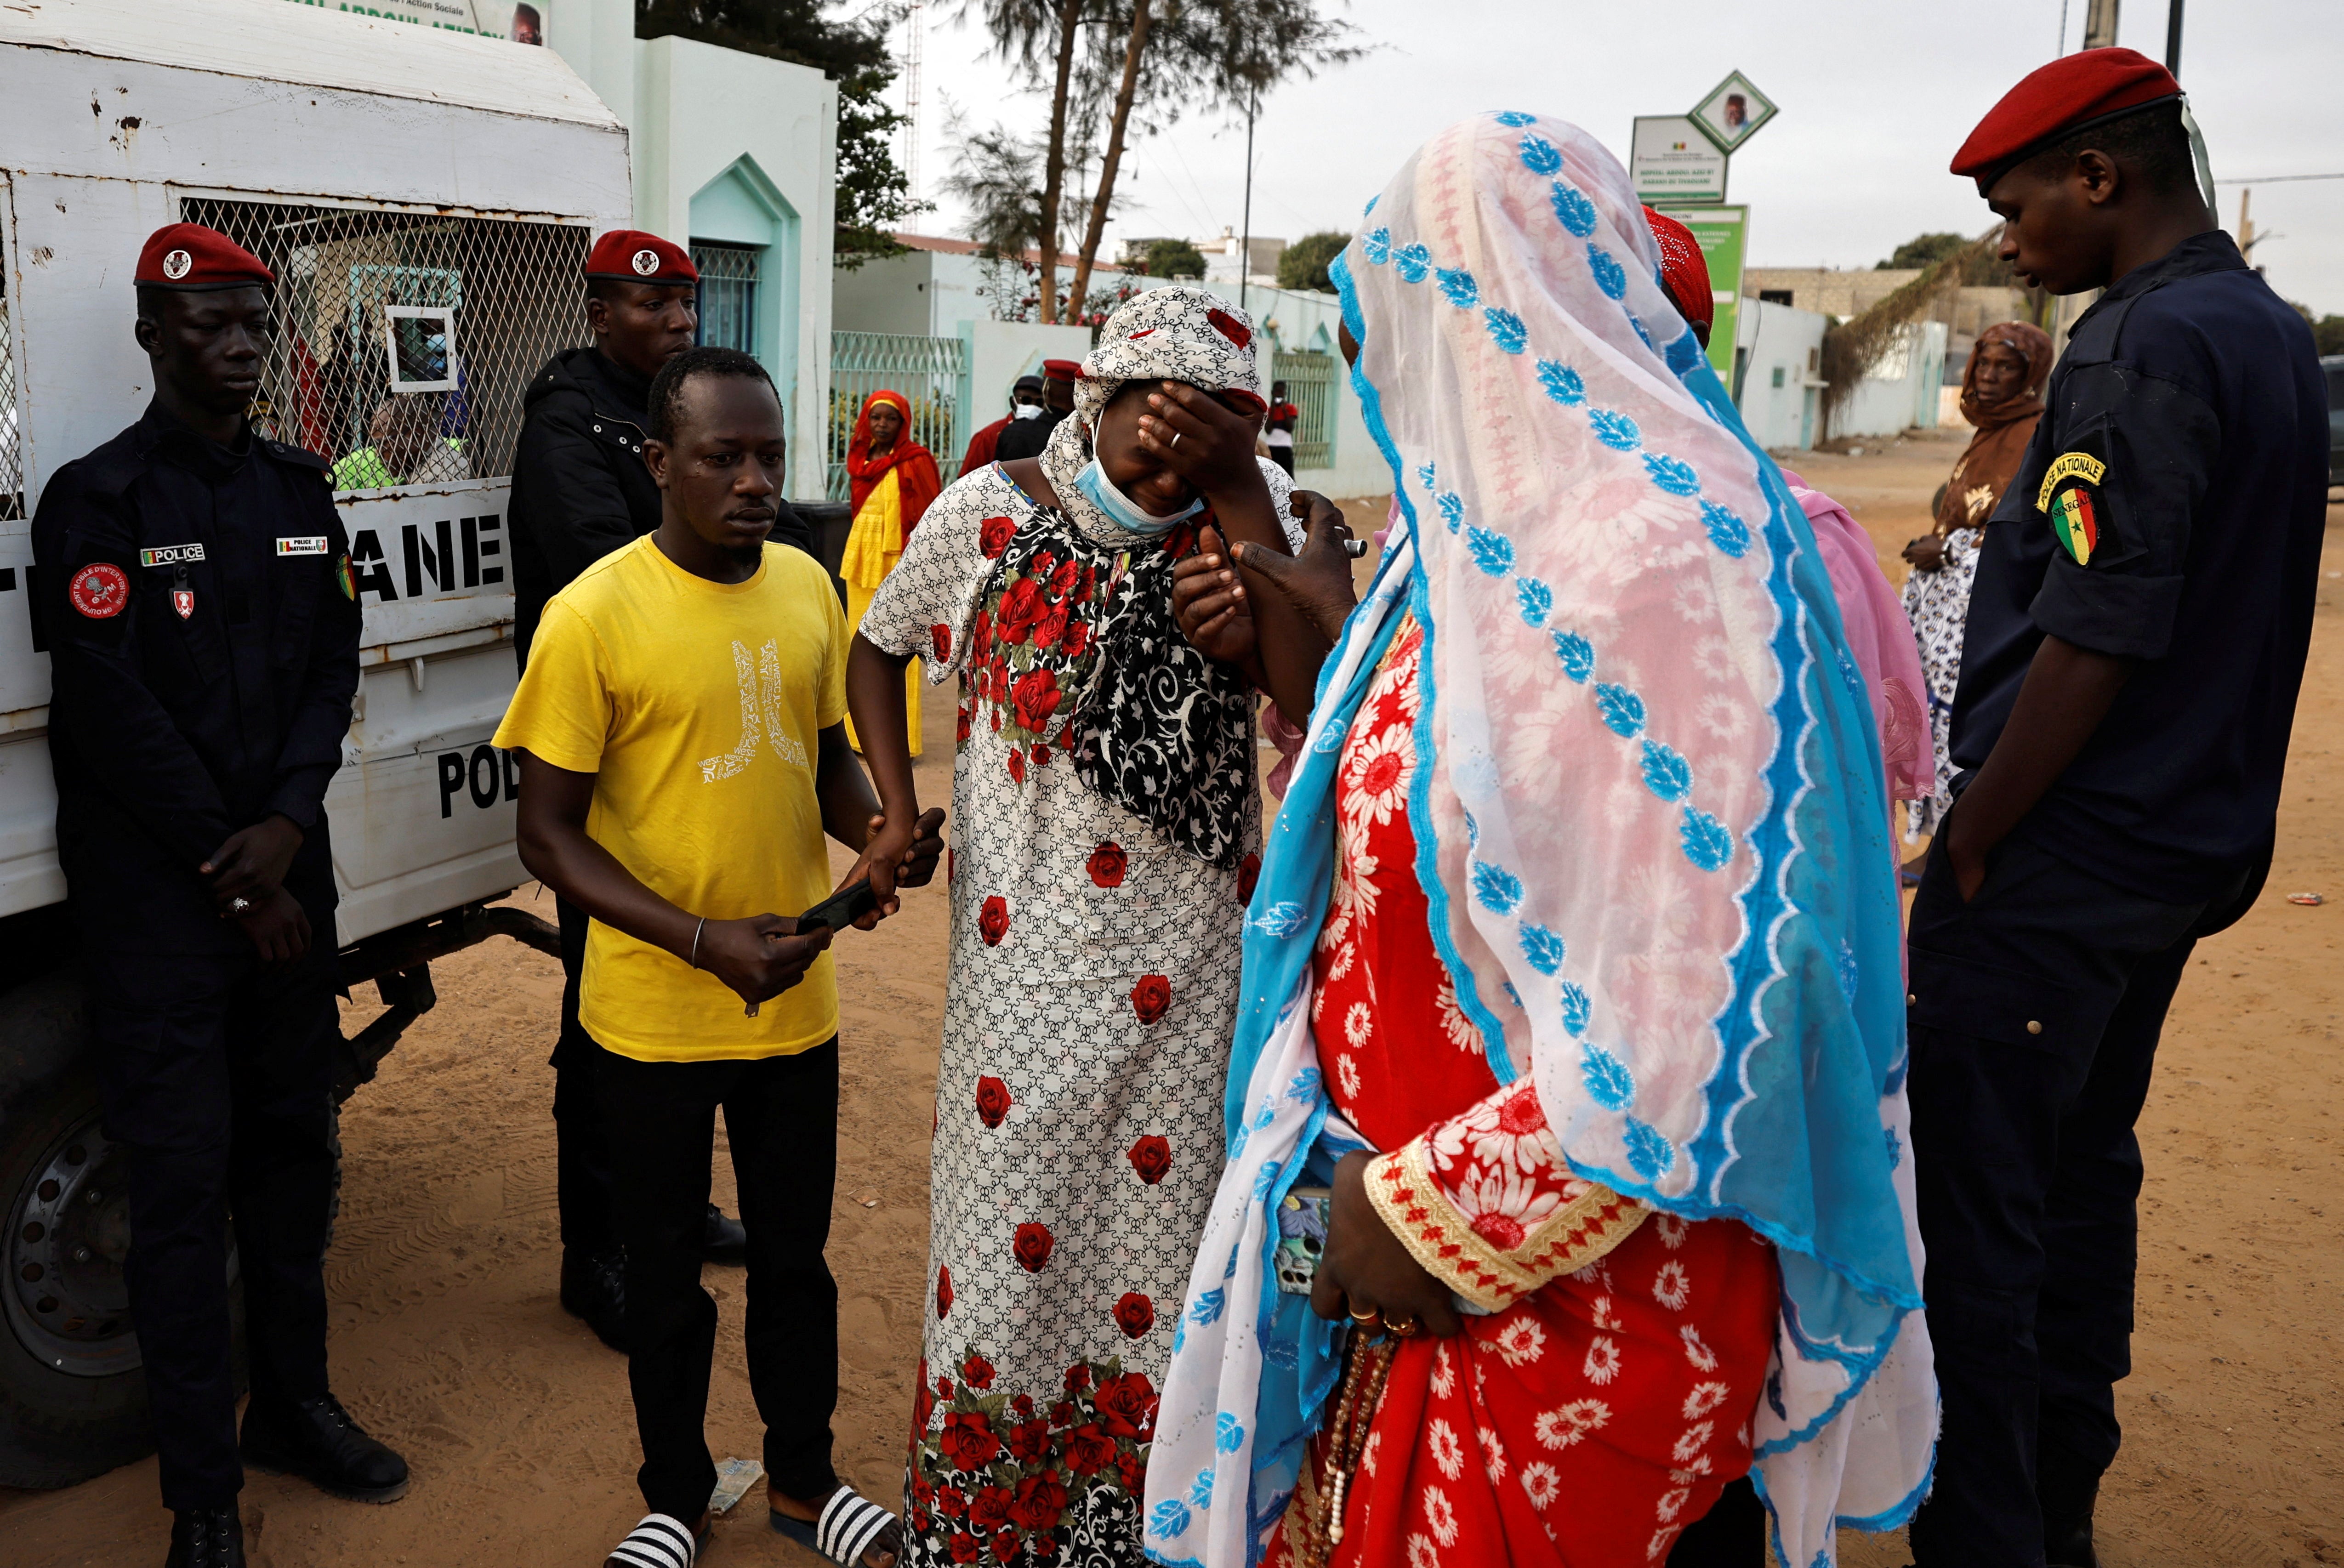 Kaba, a mother of a ten-day-old baby, reacts as she is comforted by relatives